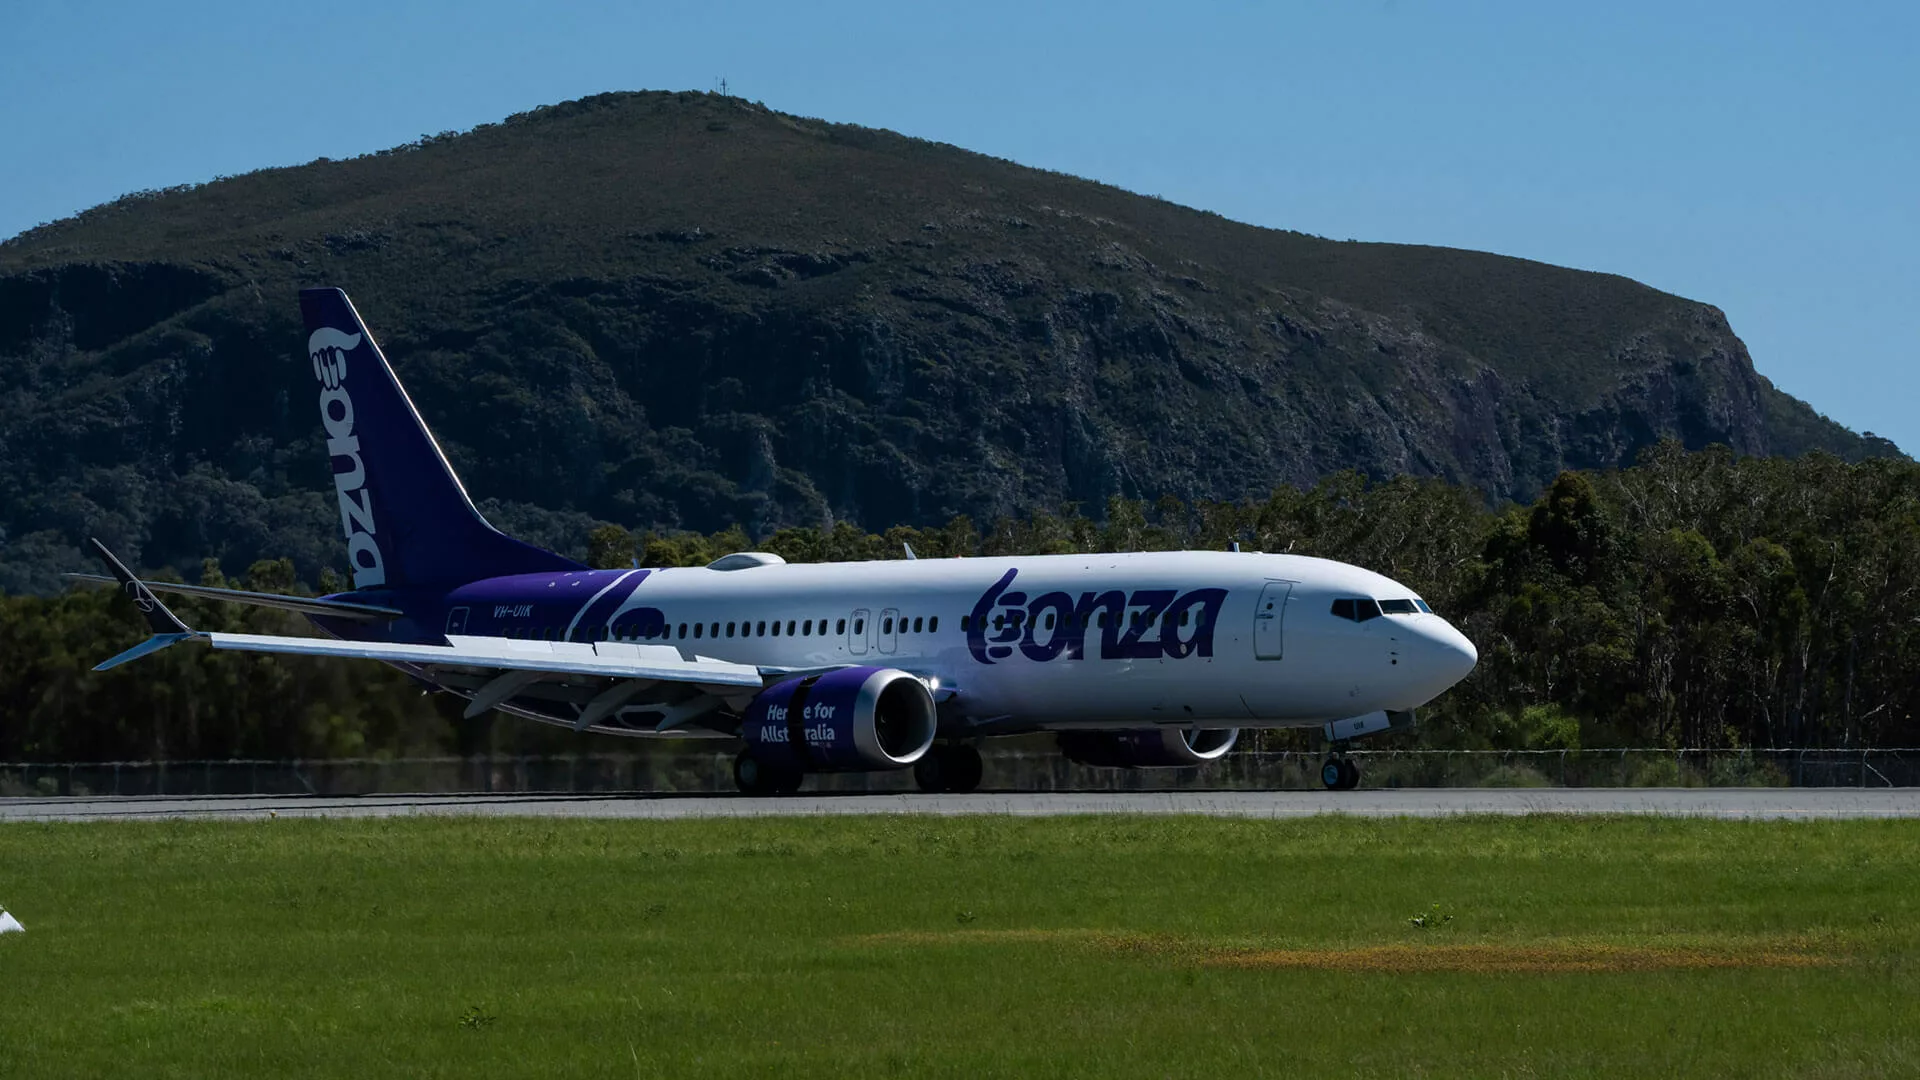 Launch of new Bonza airline to be a game-changer for Sunshine Coast tourism